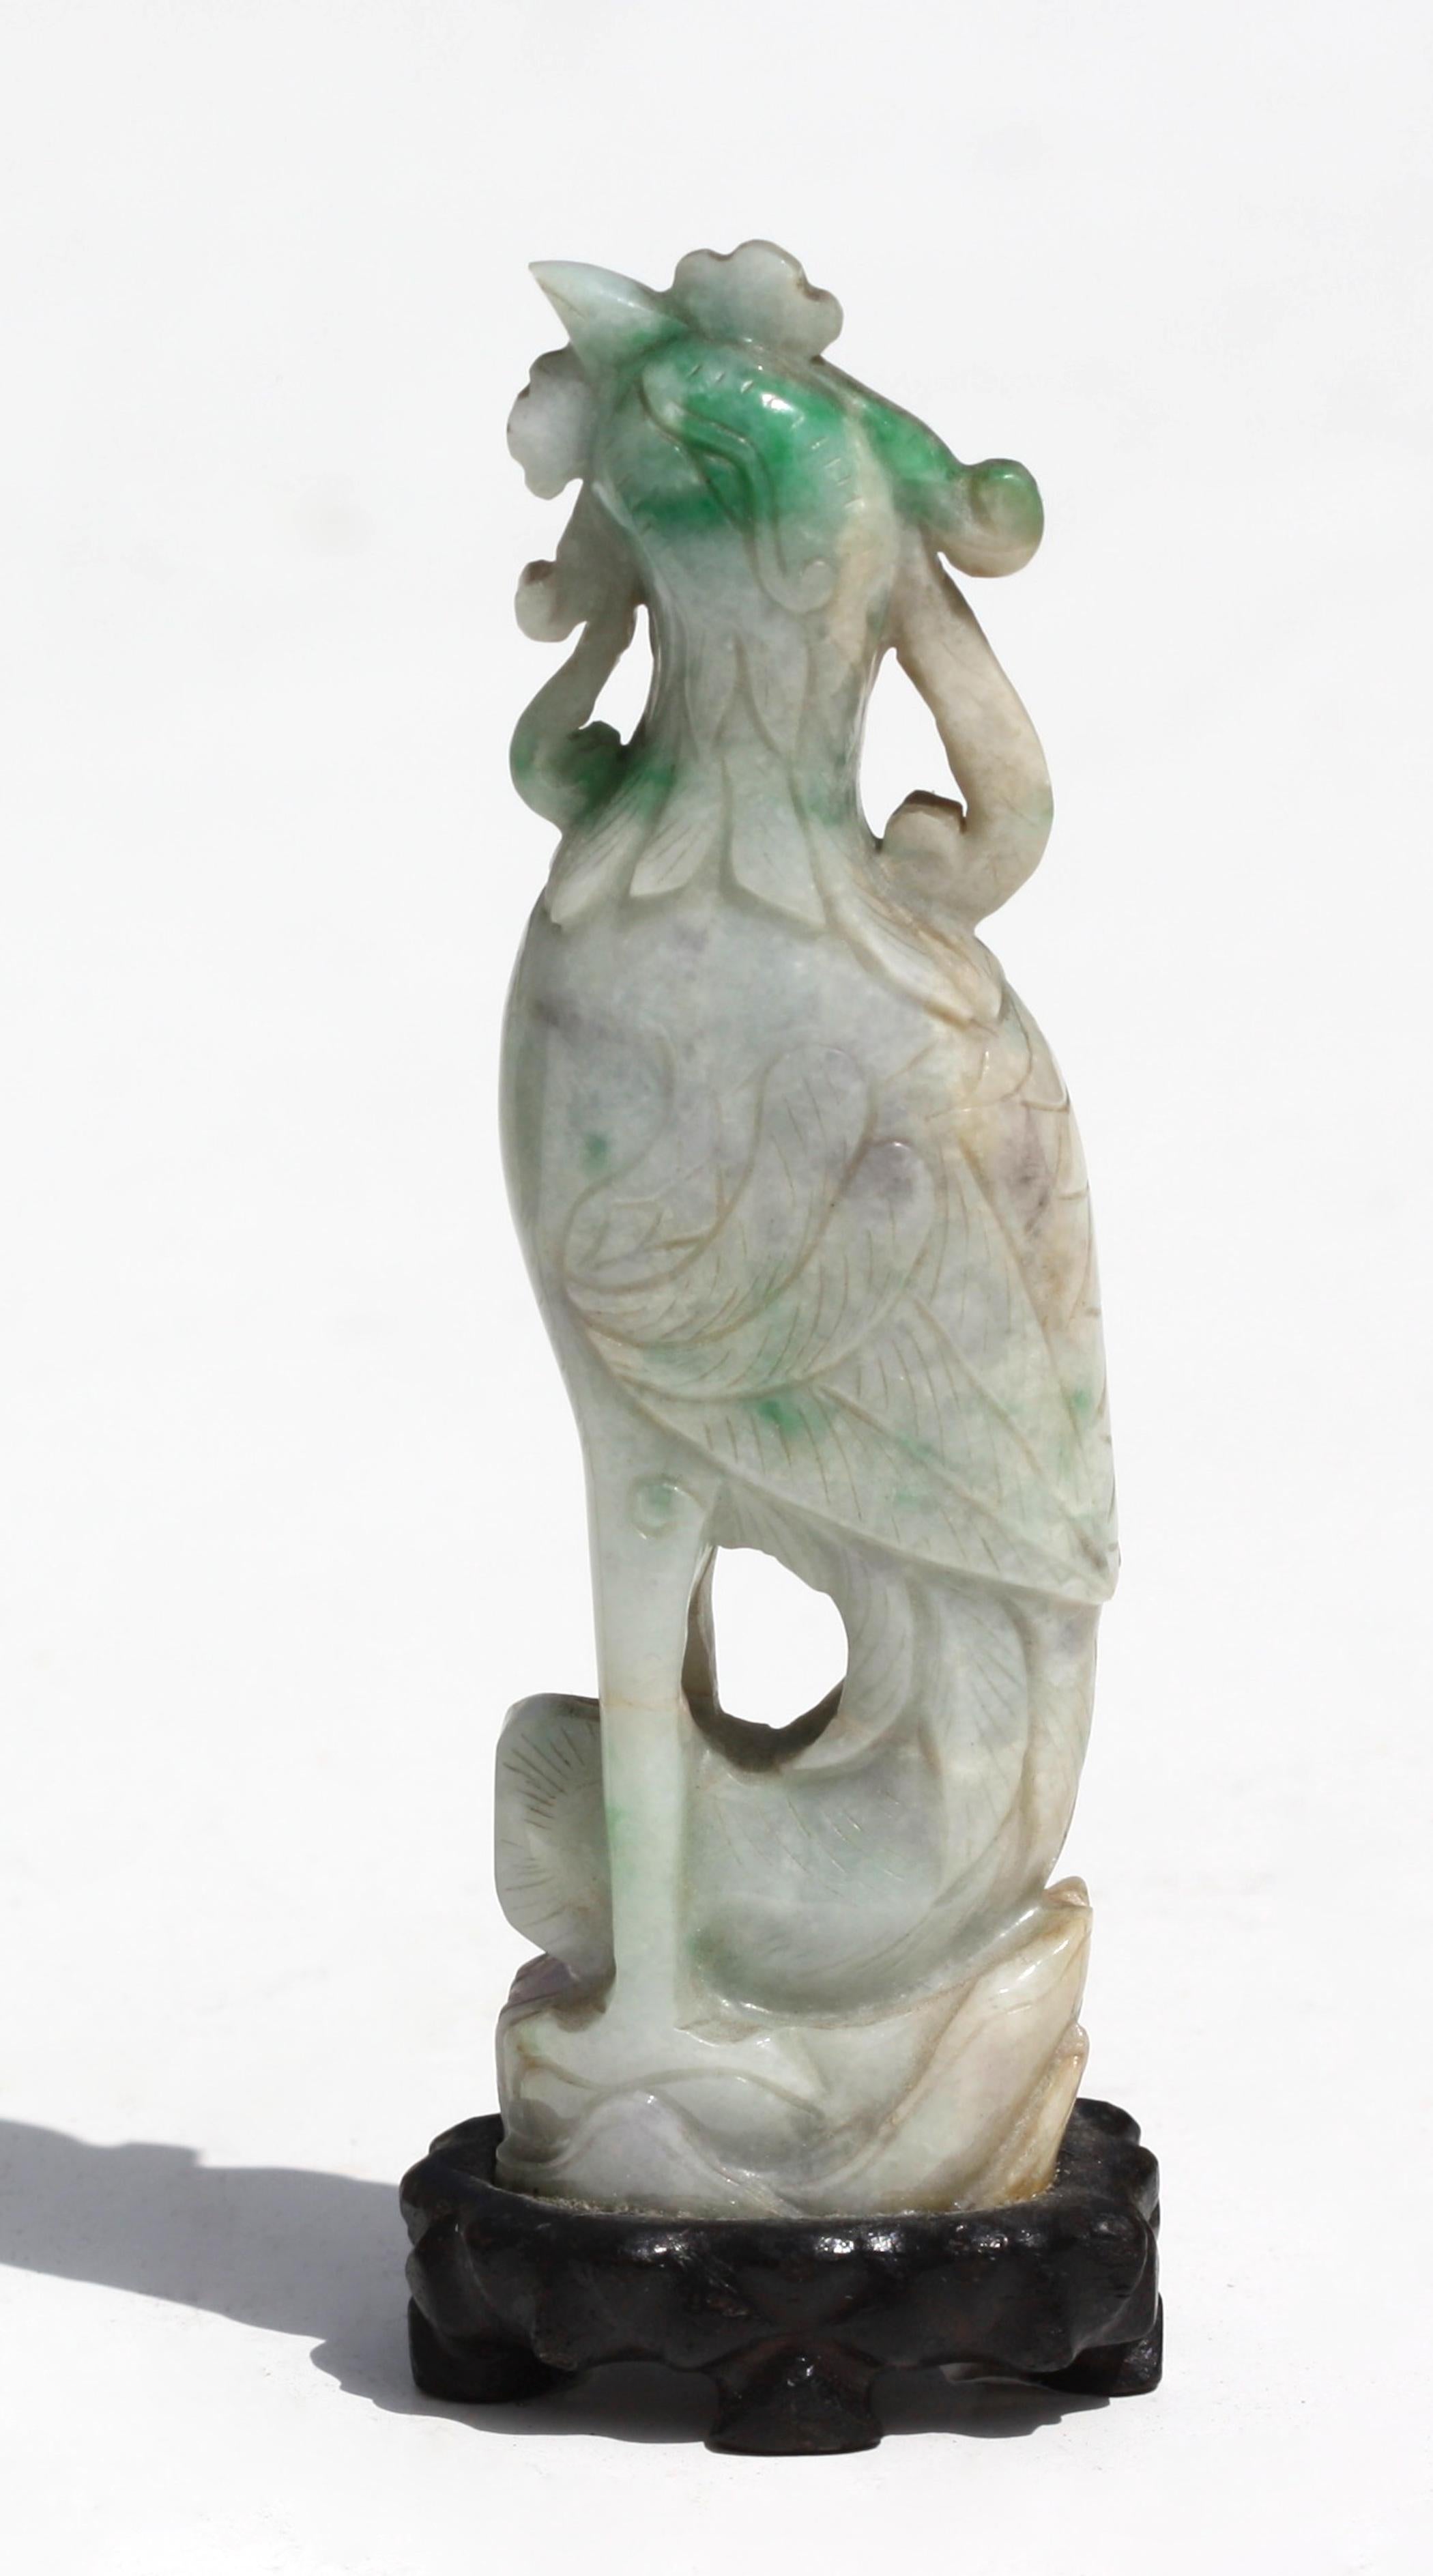 A Chinese carved Jadeite figure of a Phoenix
Perched on rockwork, the pale mottled lavender stone with splashes of bright apple-green and russet, wood stand (2)
Measure: Height on wood stand 5.5 in. (13.97 cm.) 
Provenance
Collection of William